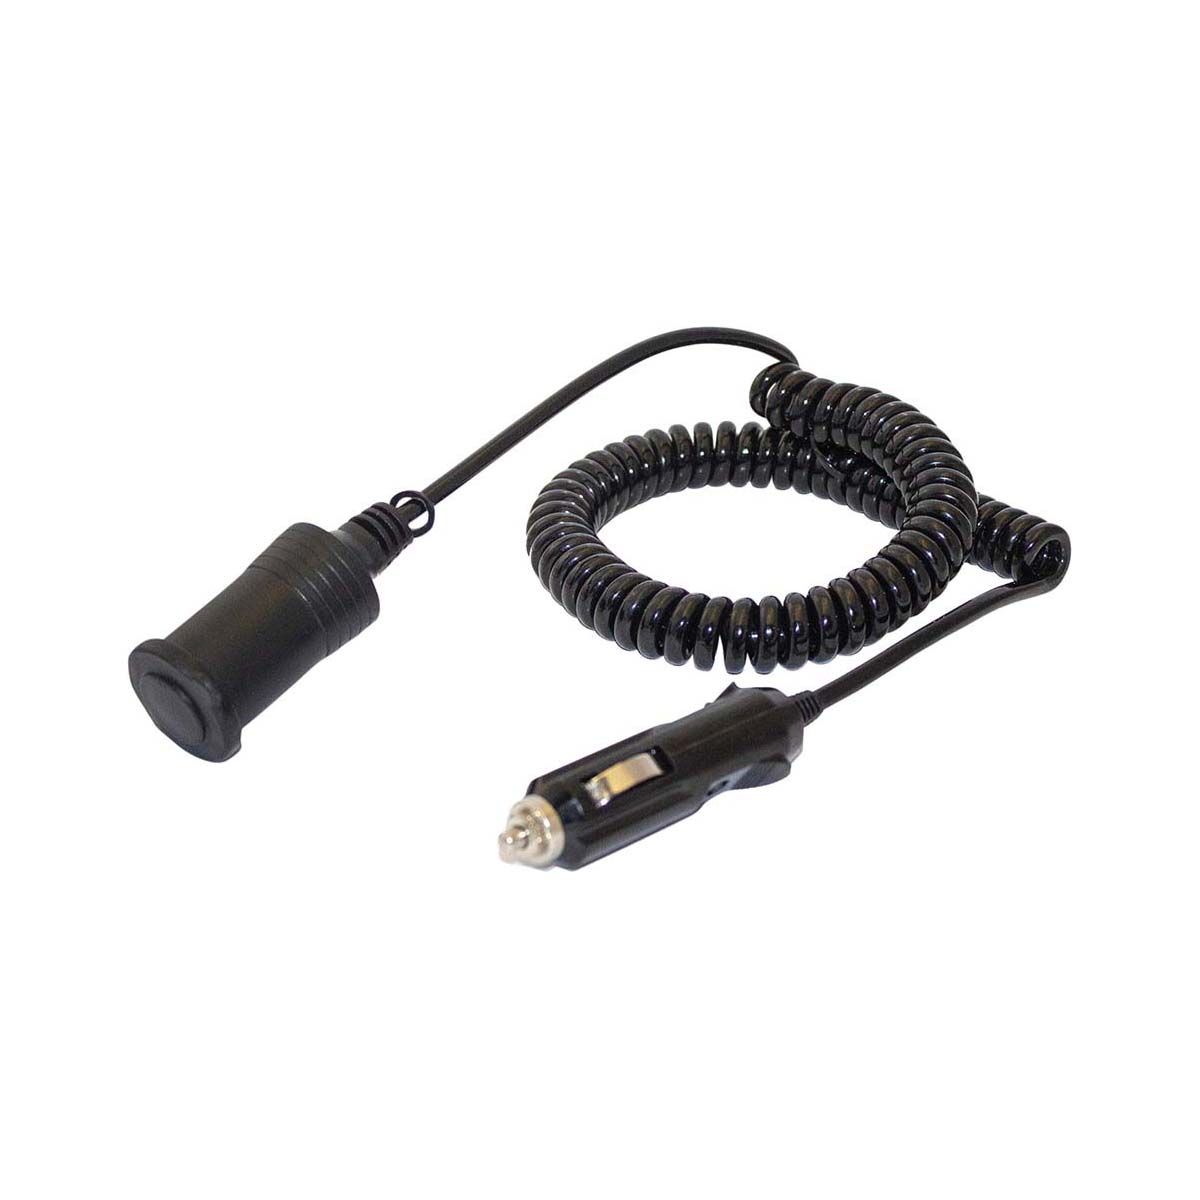 KT Cables 3m Extension Cable with Socket